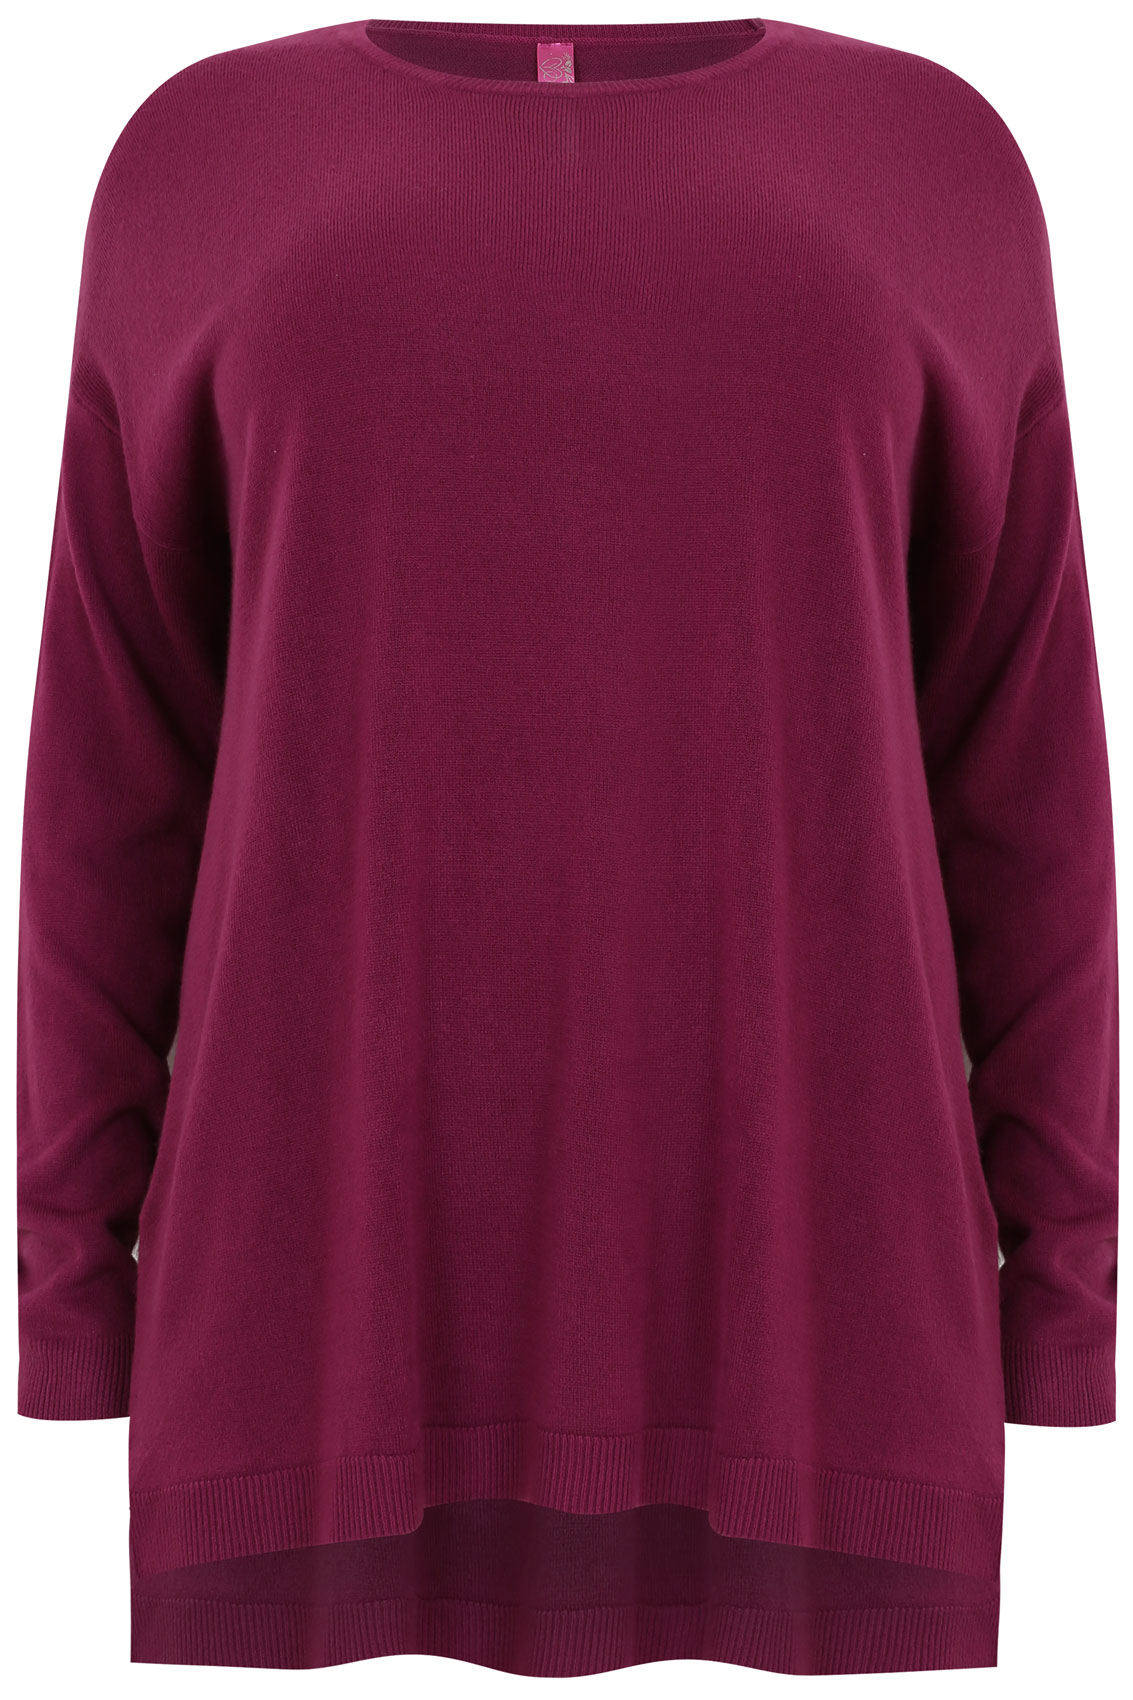 Dark Pink Supersoft Crew Neck Jumper With Stepped Hem Pus Size 16 to 32